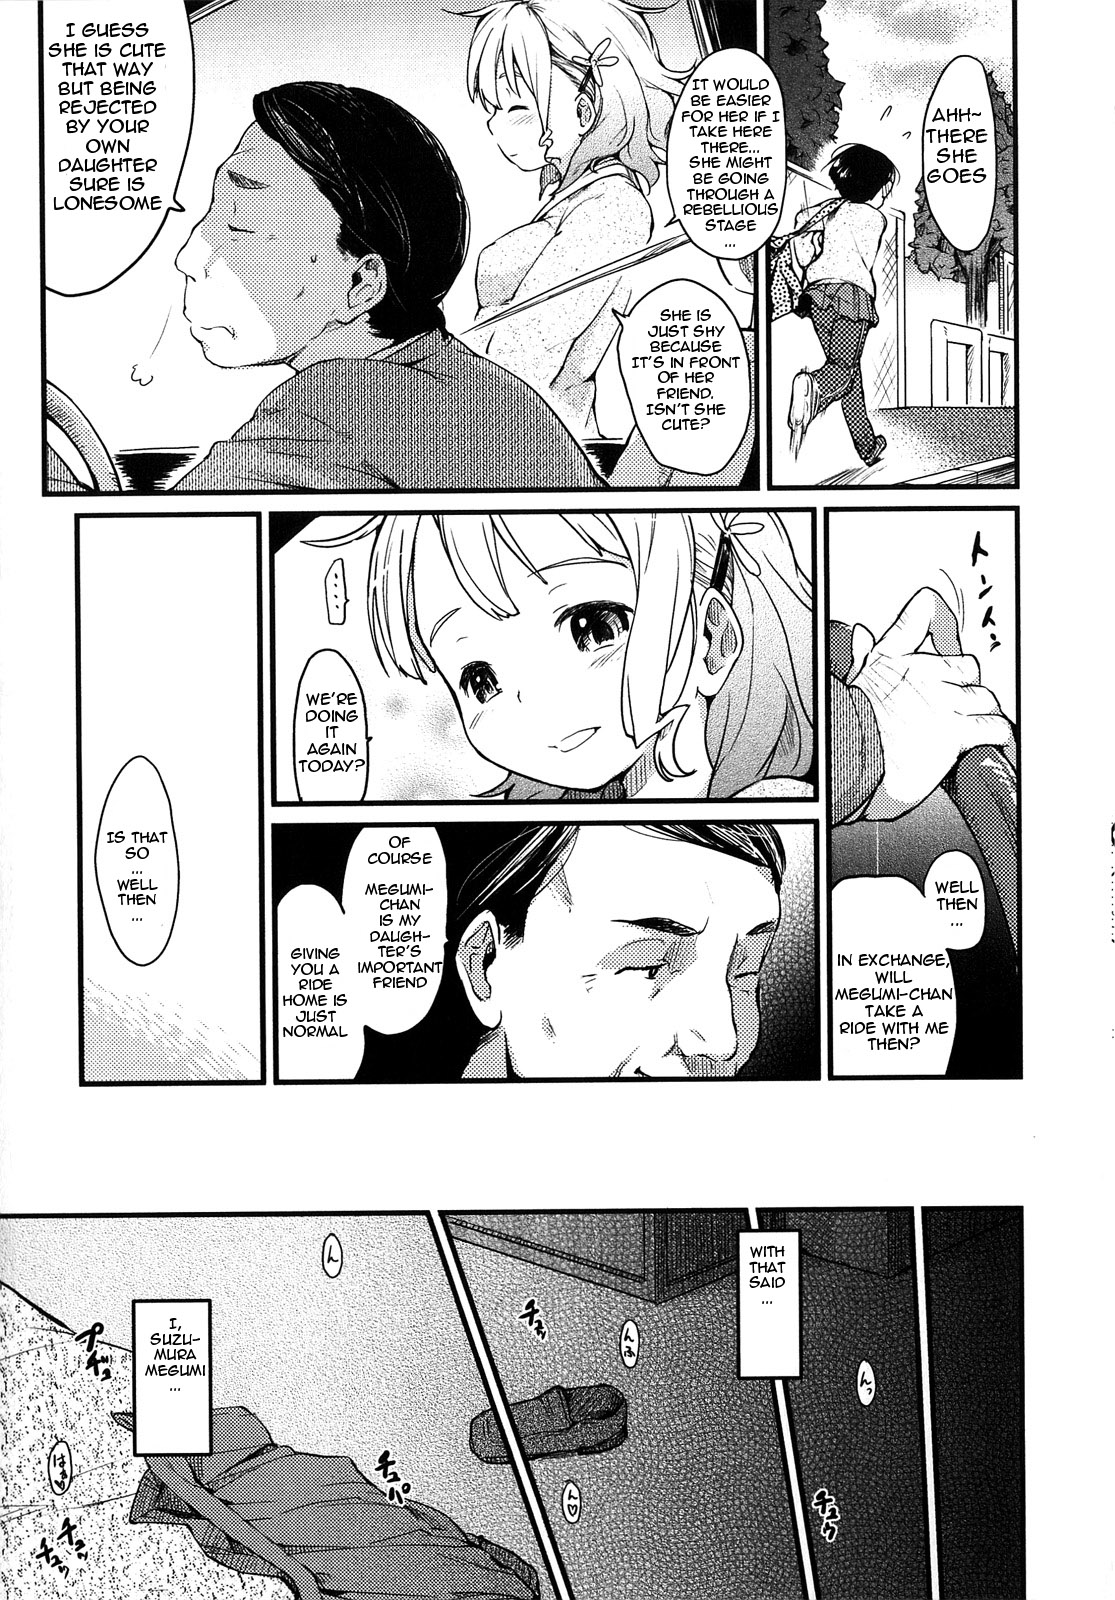 [Higenamuchi] An Older Person [English] + Extra chapter page 3 full